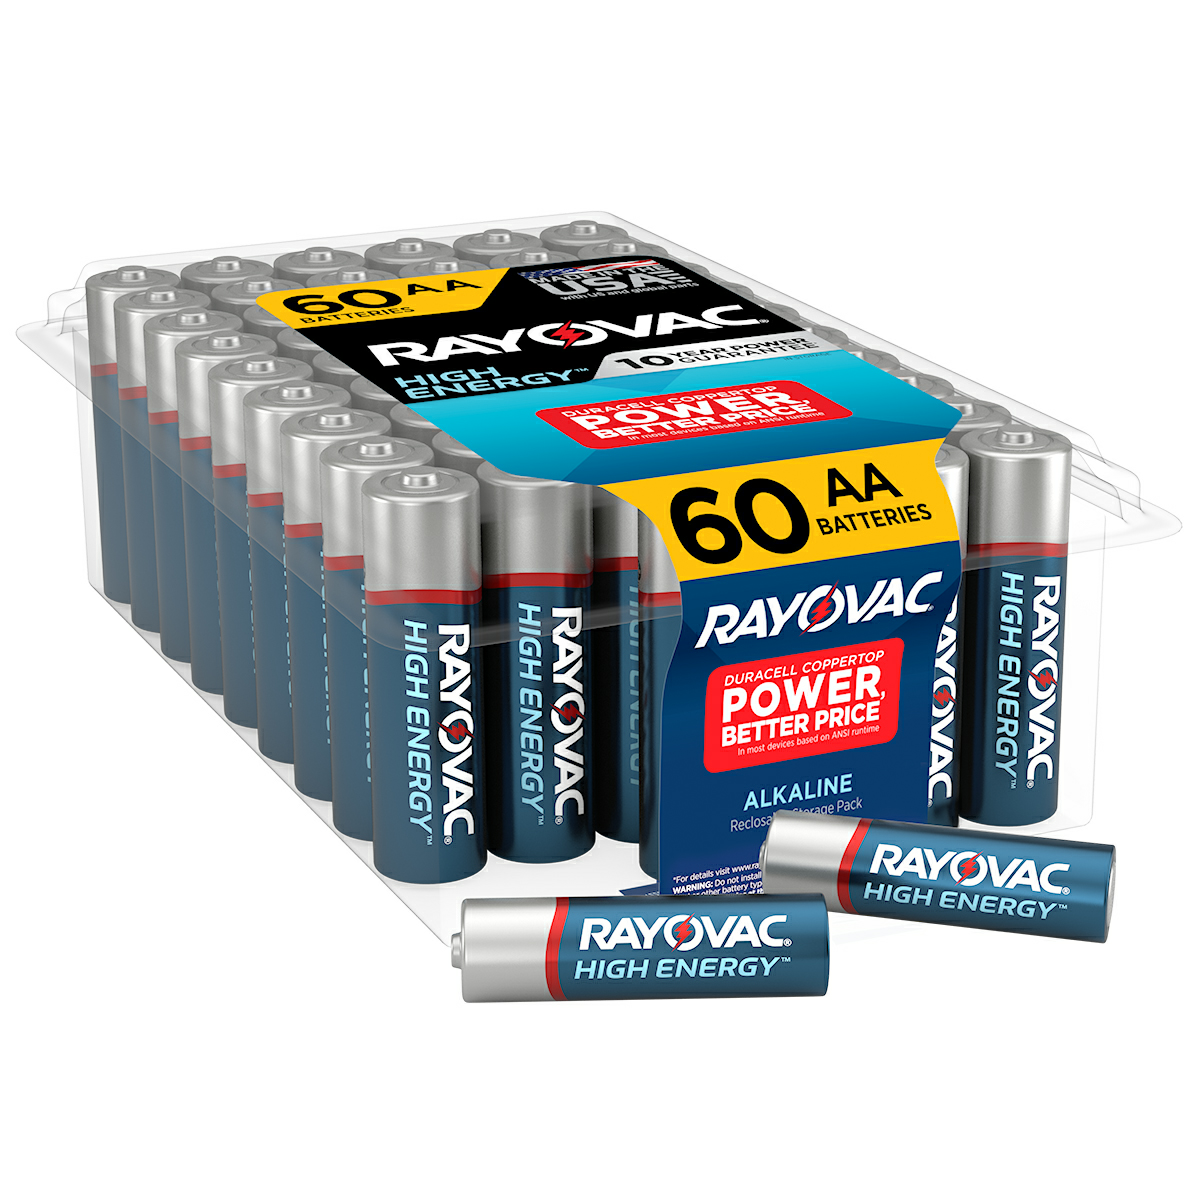 Rayovac High Energy AA Batteries (60 Pack), Double A Batteries - Walmart.com - Walmart.com $15.97